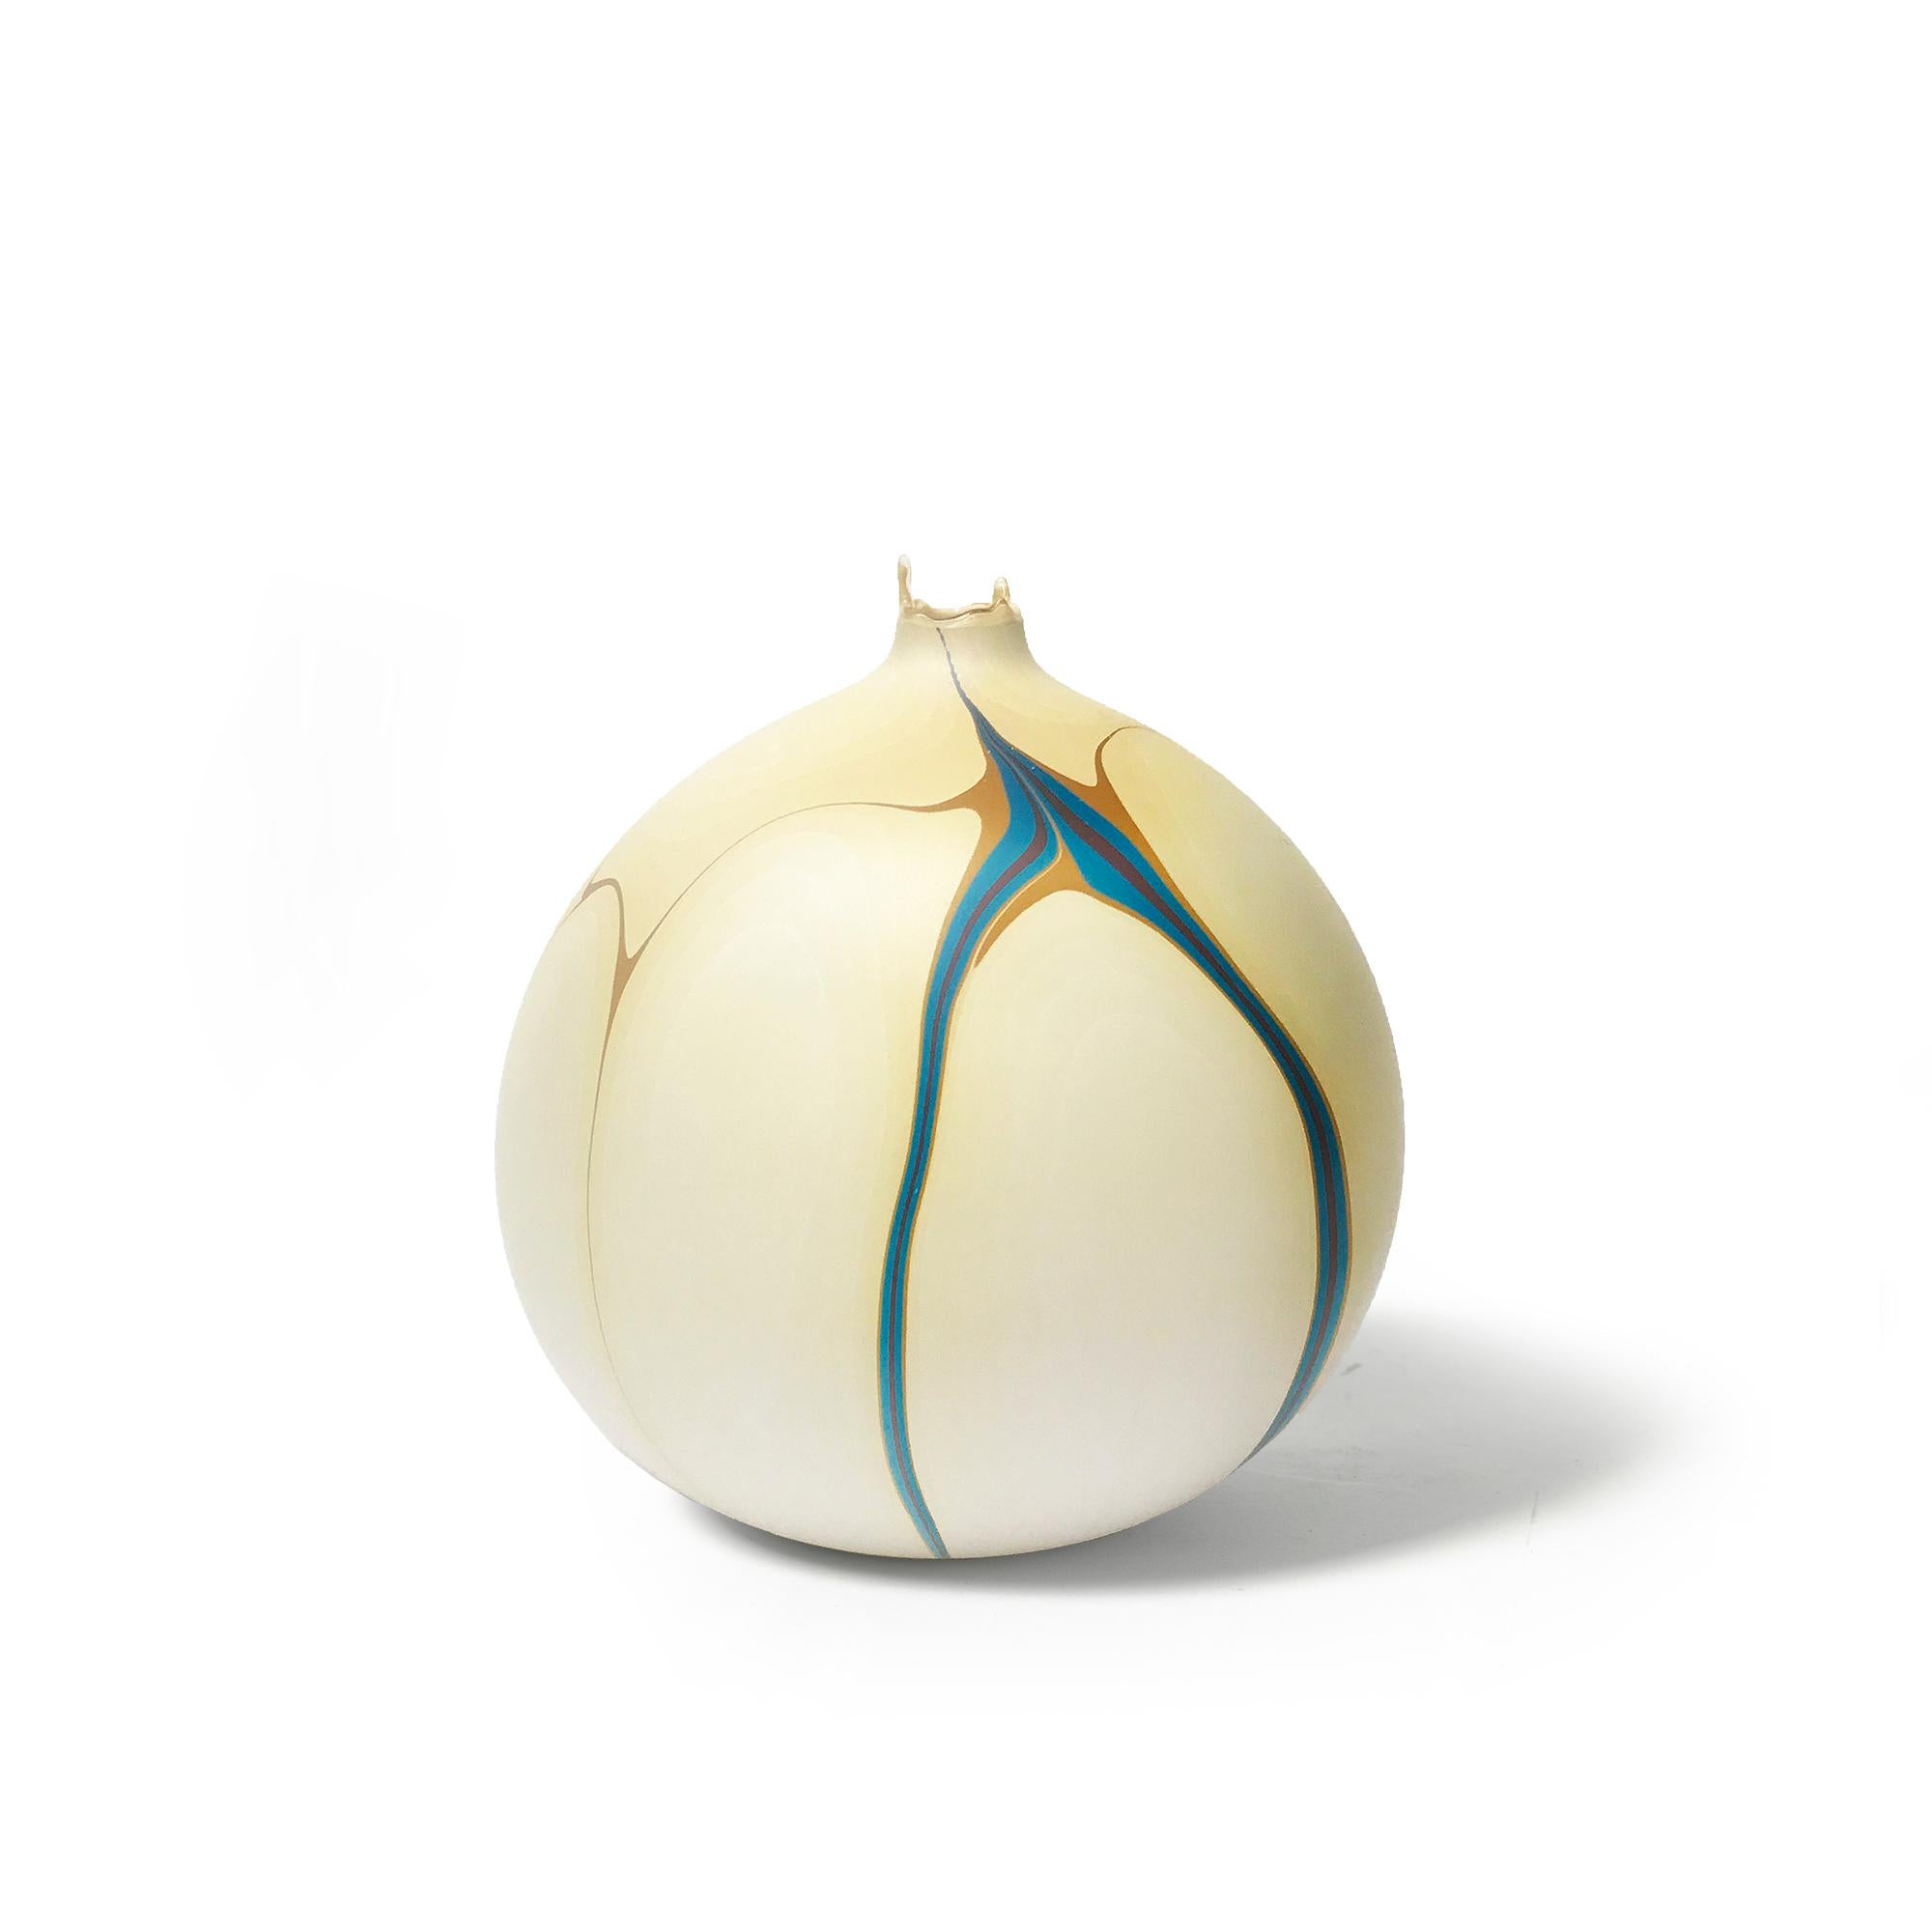 Rhine round hydro vase by Elyse Graham
Dimensions: W 20 x D 20 x H 23 cm
Materials: Plaster, Resin
MOLDED, DYED, AND FINISHED BY HAND IN LA. CUSTOMIZATION
AVAILABLE.
ALL PIECES ARE MADE TO ORDER

Our new Hydro Vases take on a futuristic